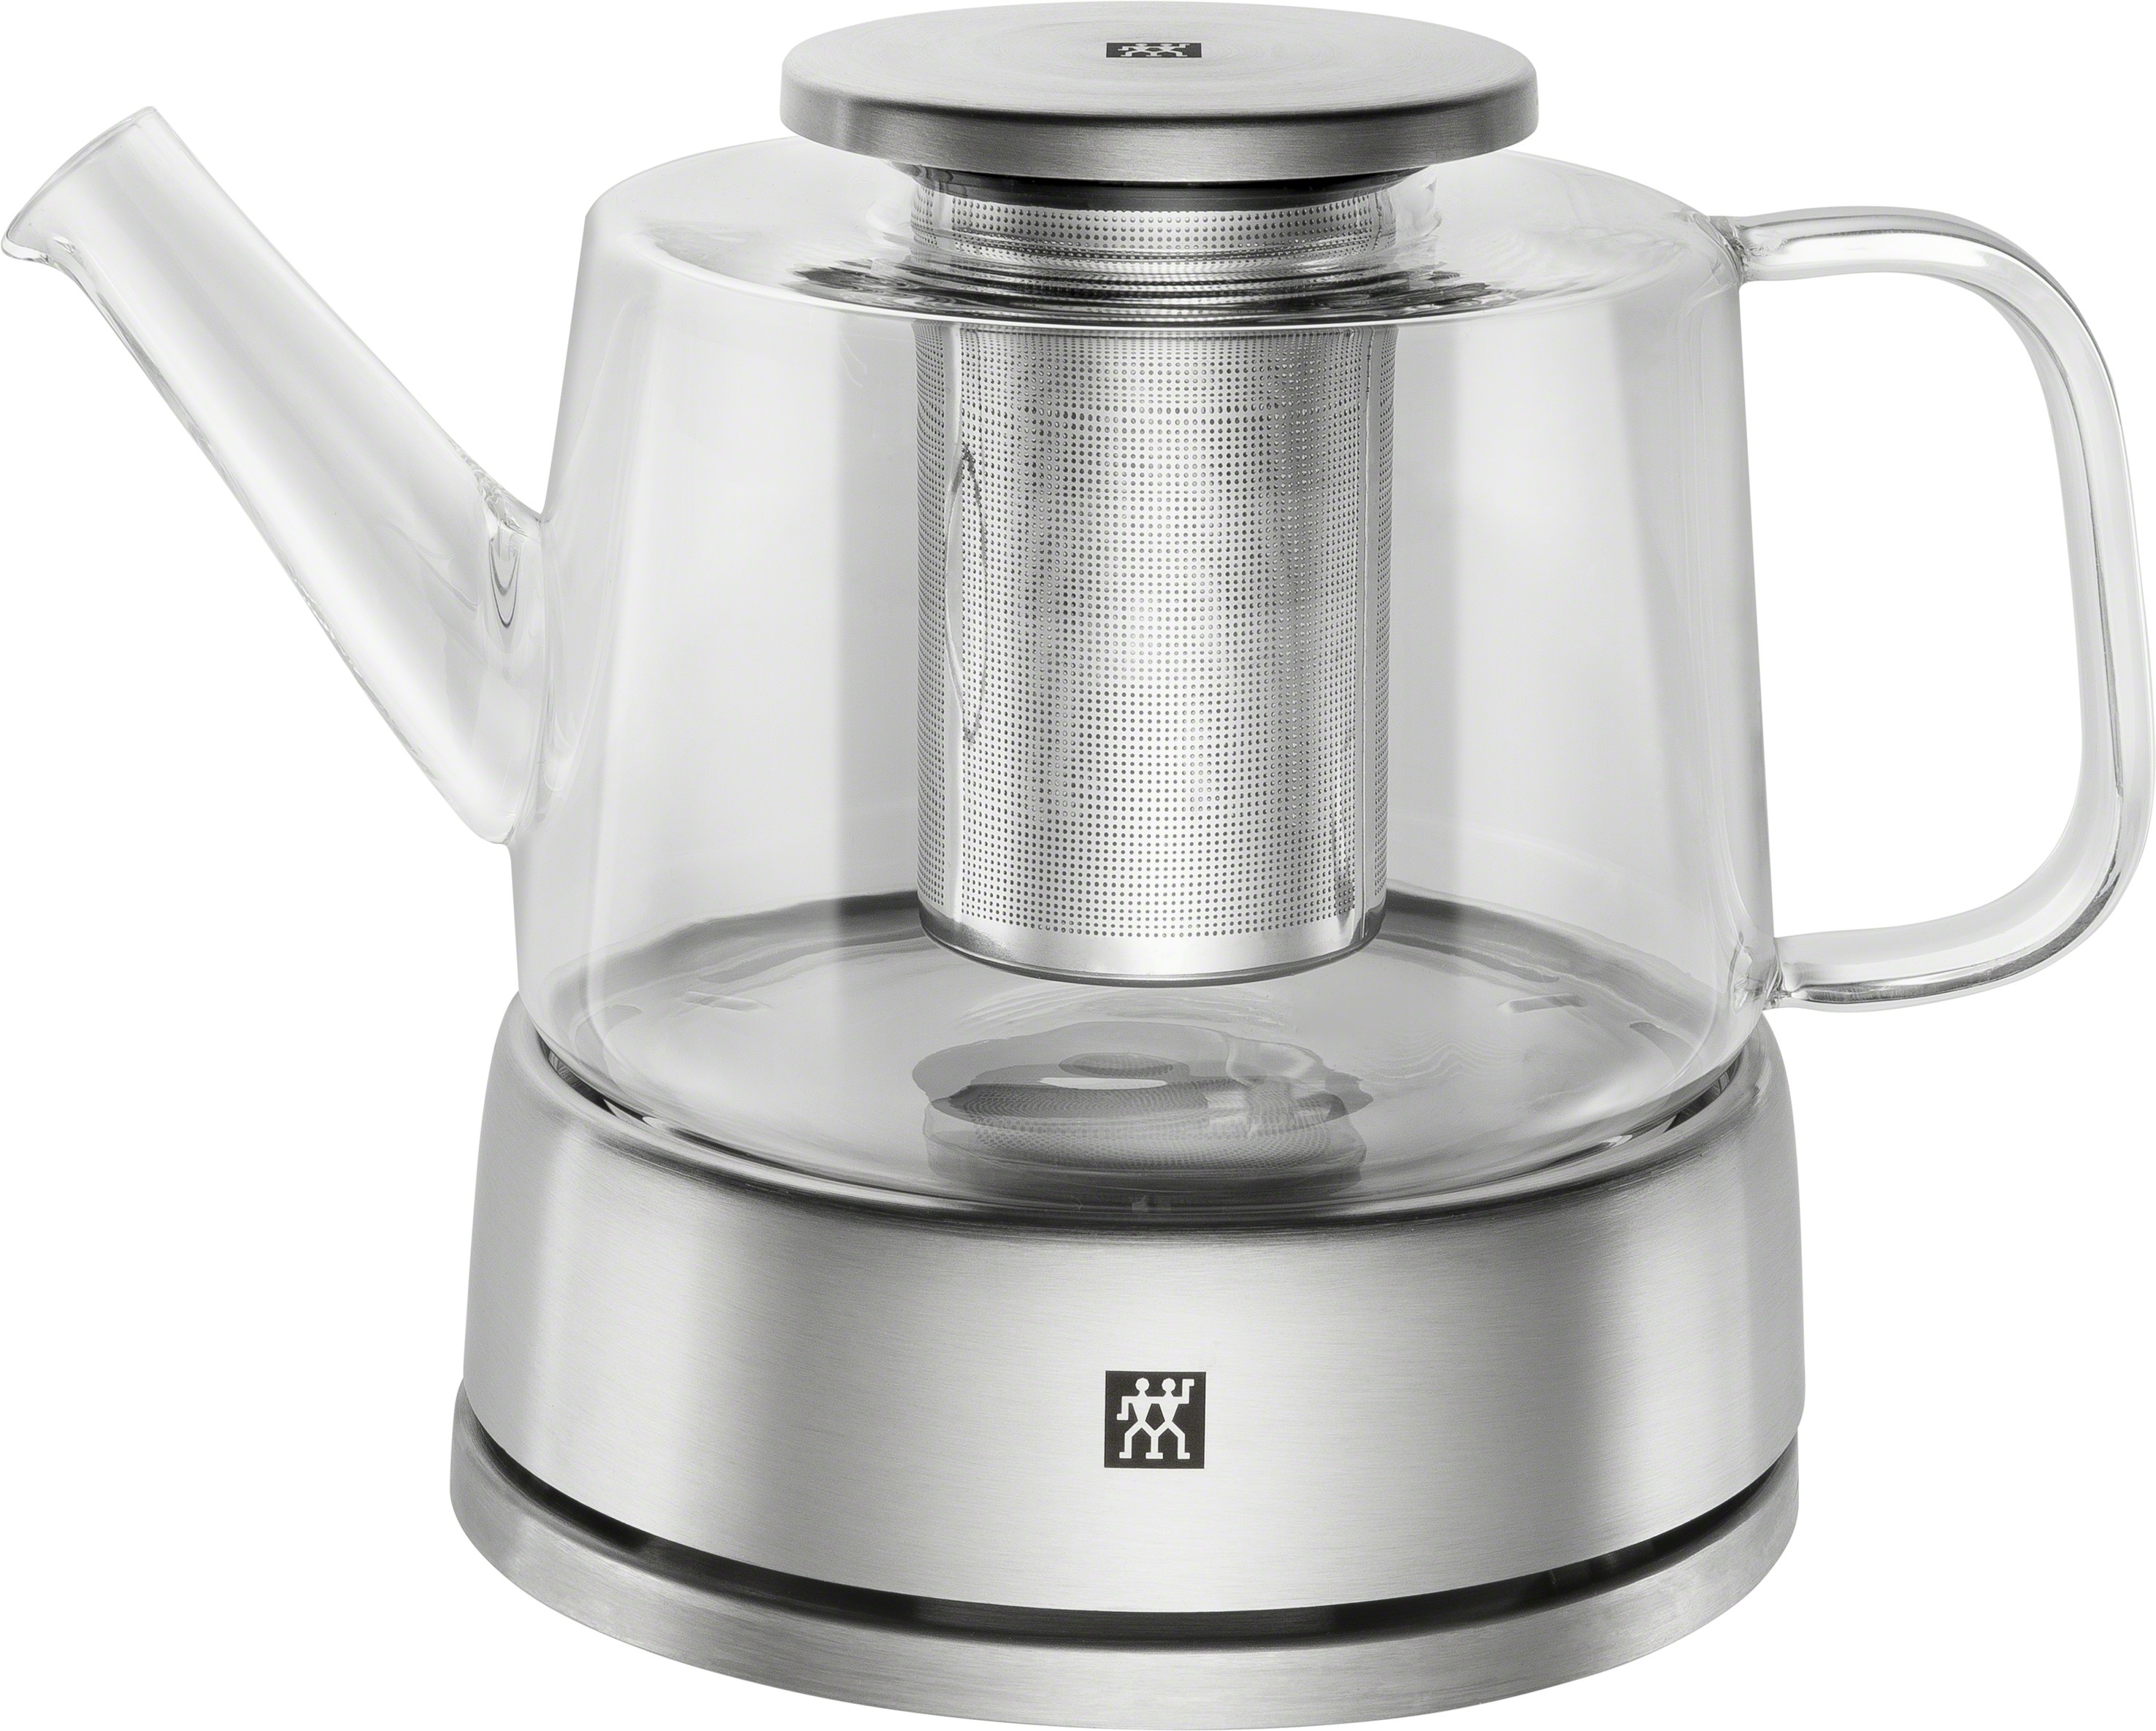 ZWILLING.COM  Tea kettle, Electric kettle, Stainless steel containers